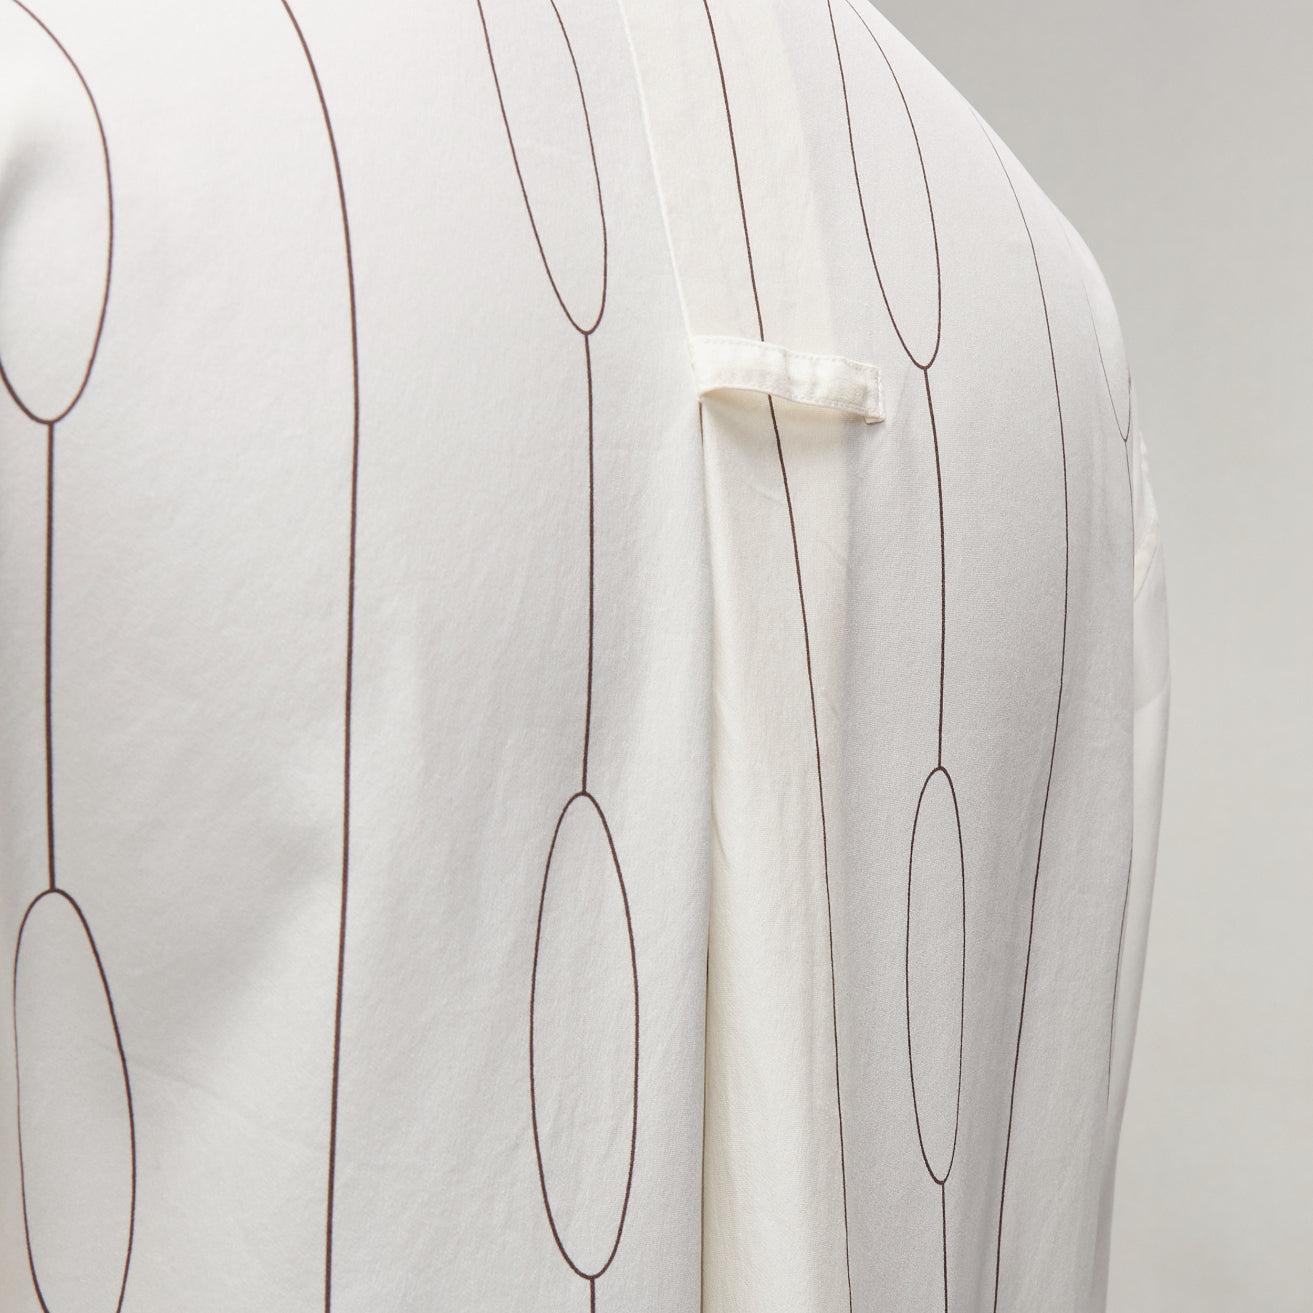 CELINE 100% silk cream oval linear half placket blouse shirt FR34 XS
Reference: EALU/A00006
Brand: Celine
Material: Silk
Color: Cream
Pattern: Abstract
Closure: Button
Extra Details: Pleat and tab detail at back below collar.
Made in: